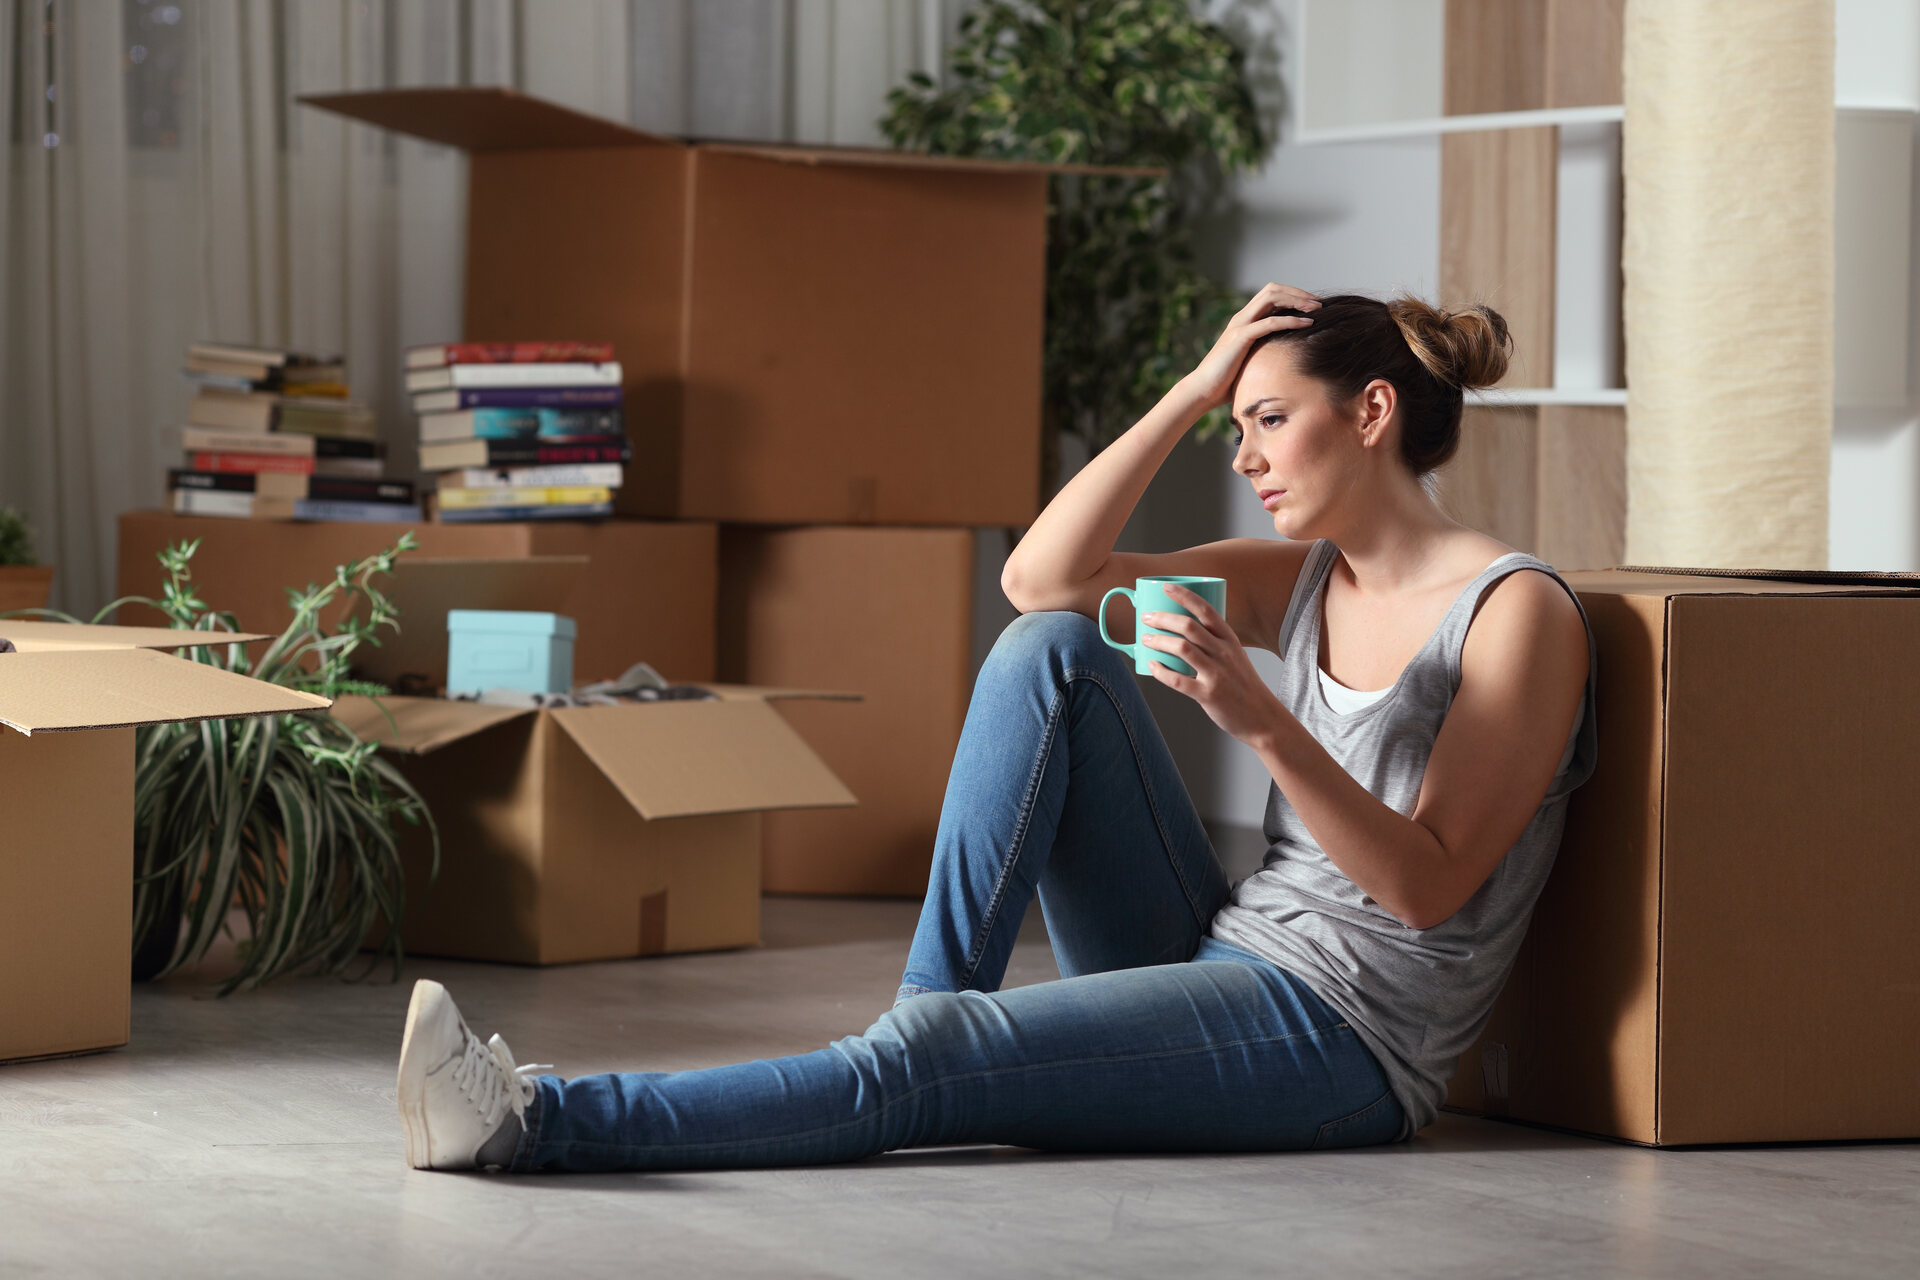 A stressed out woman sitting on the floor with boxes